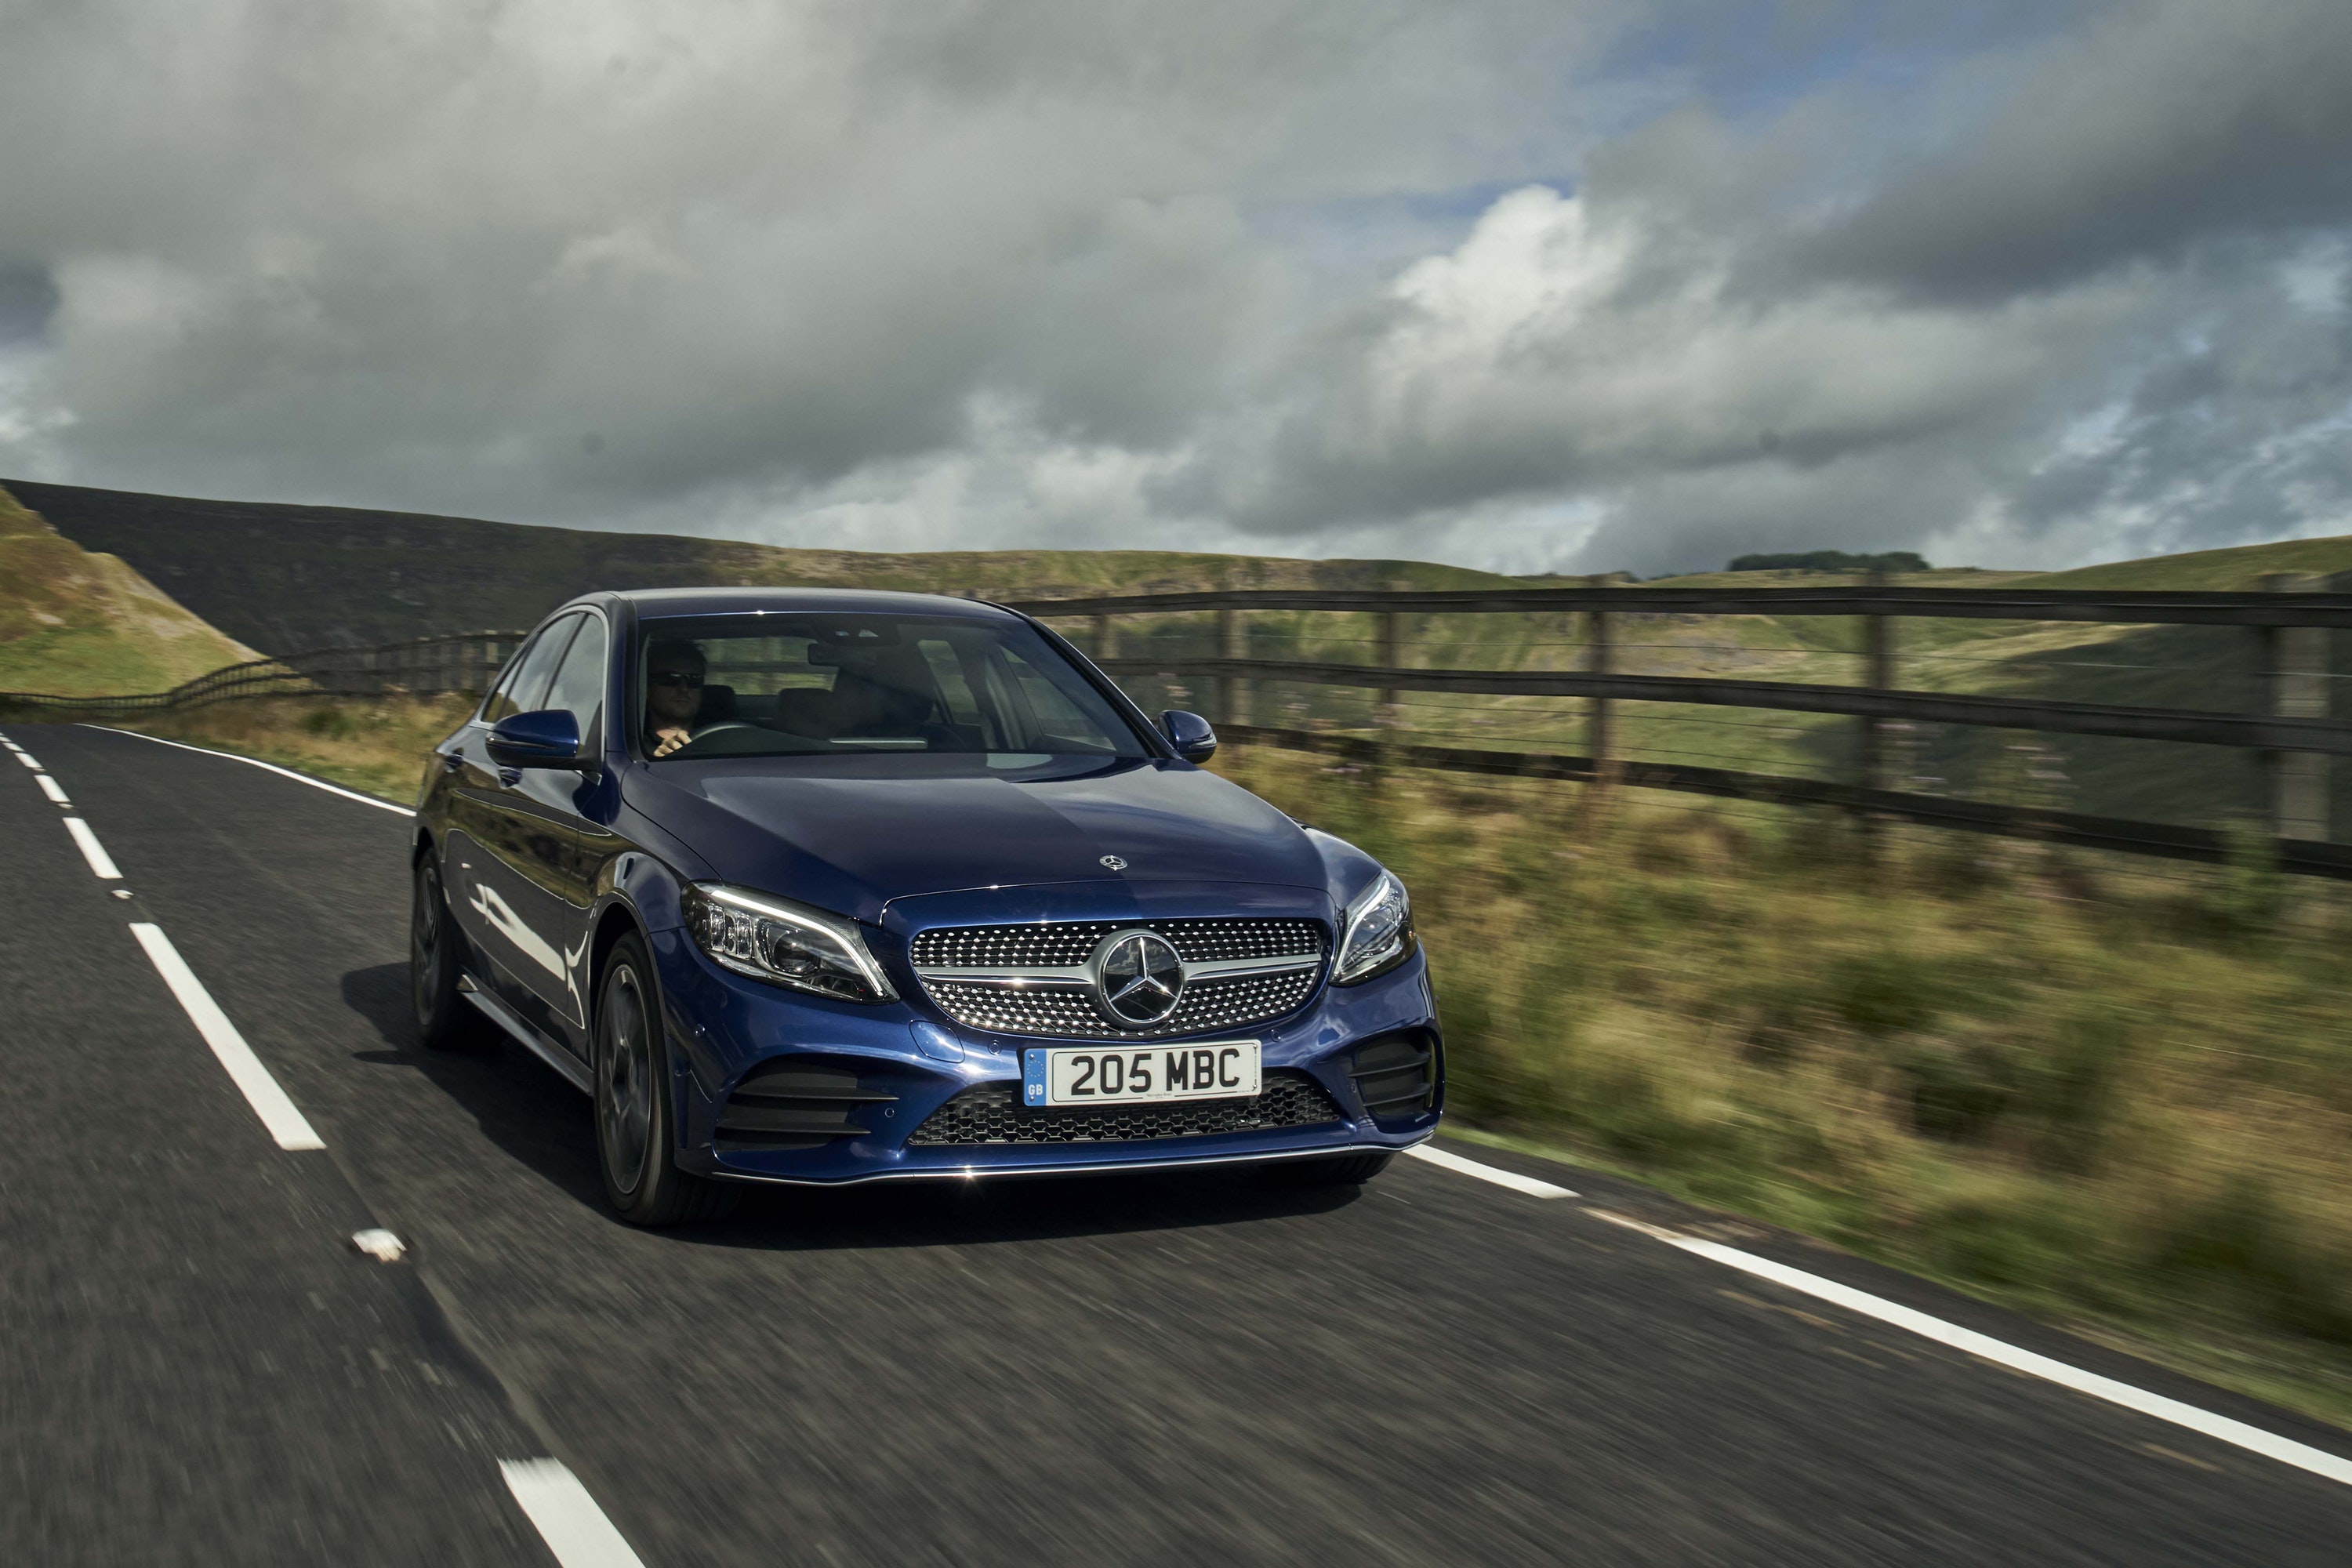 Front view of blue Mercedes C-Class driving on a road